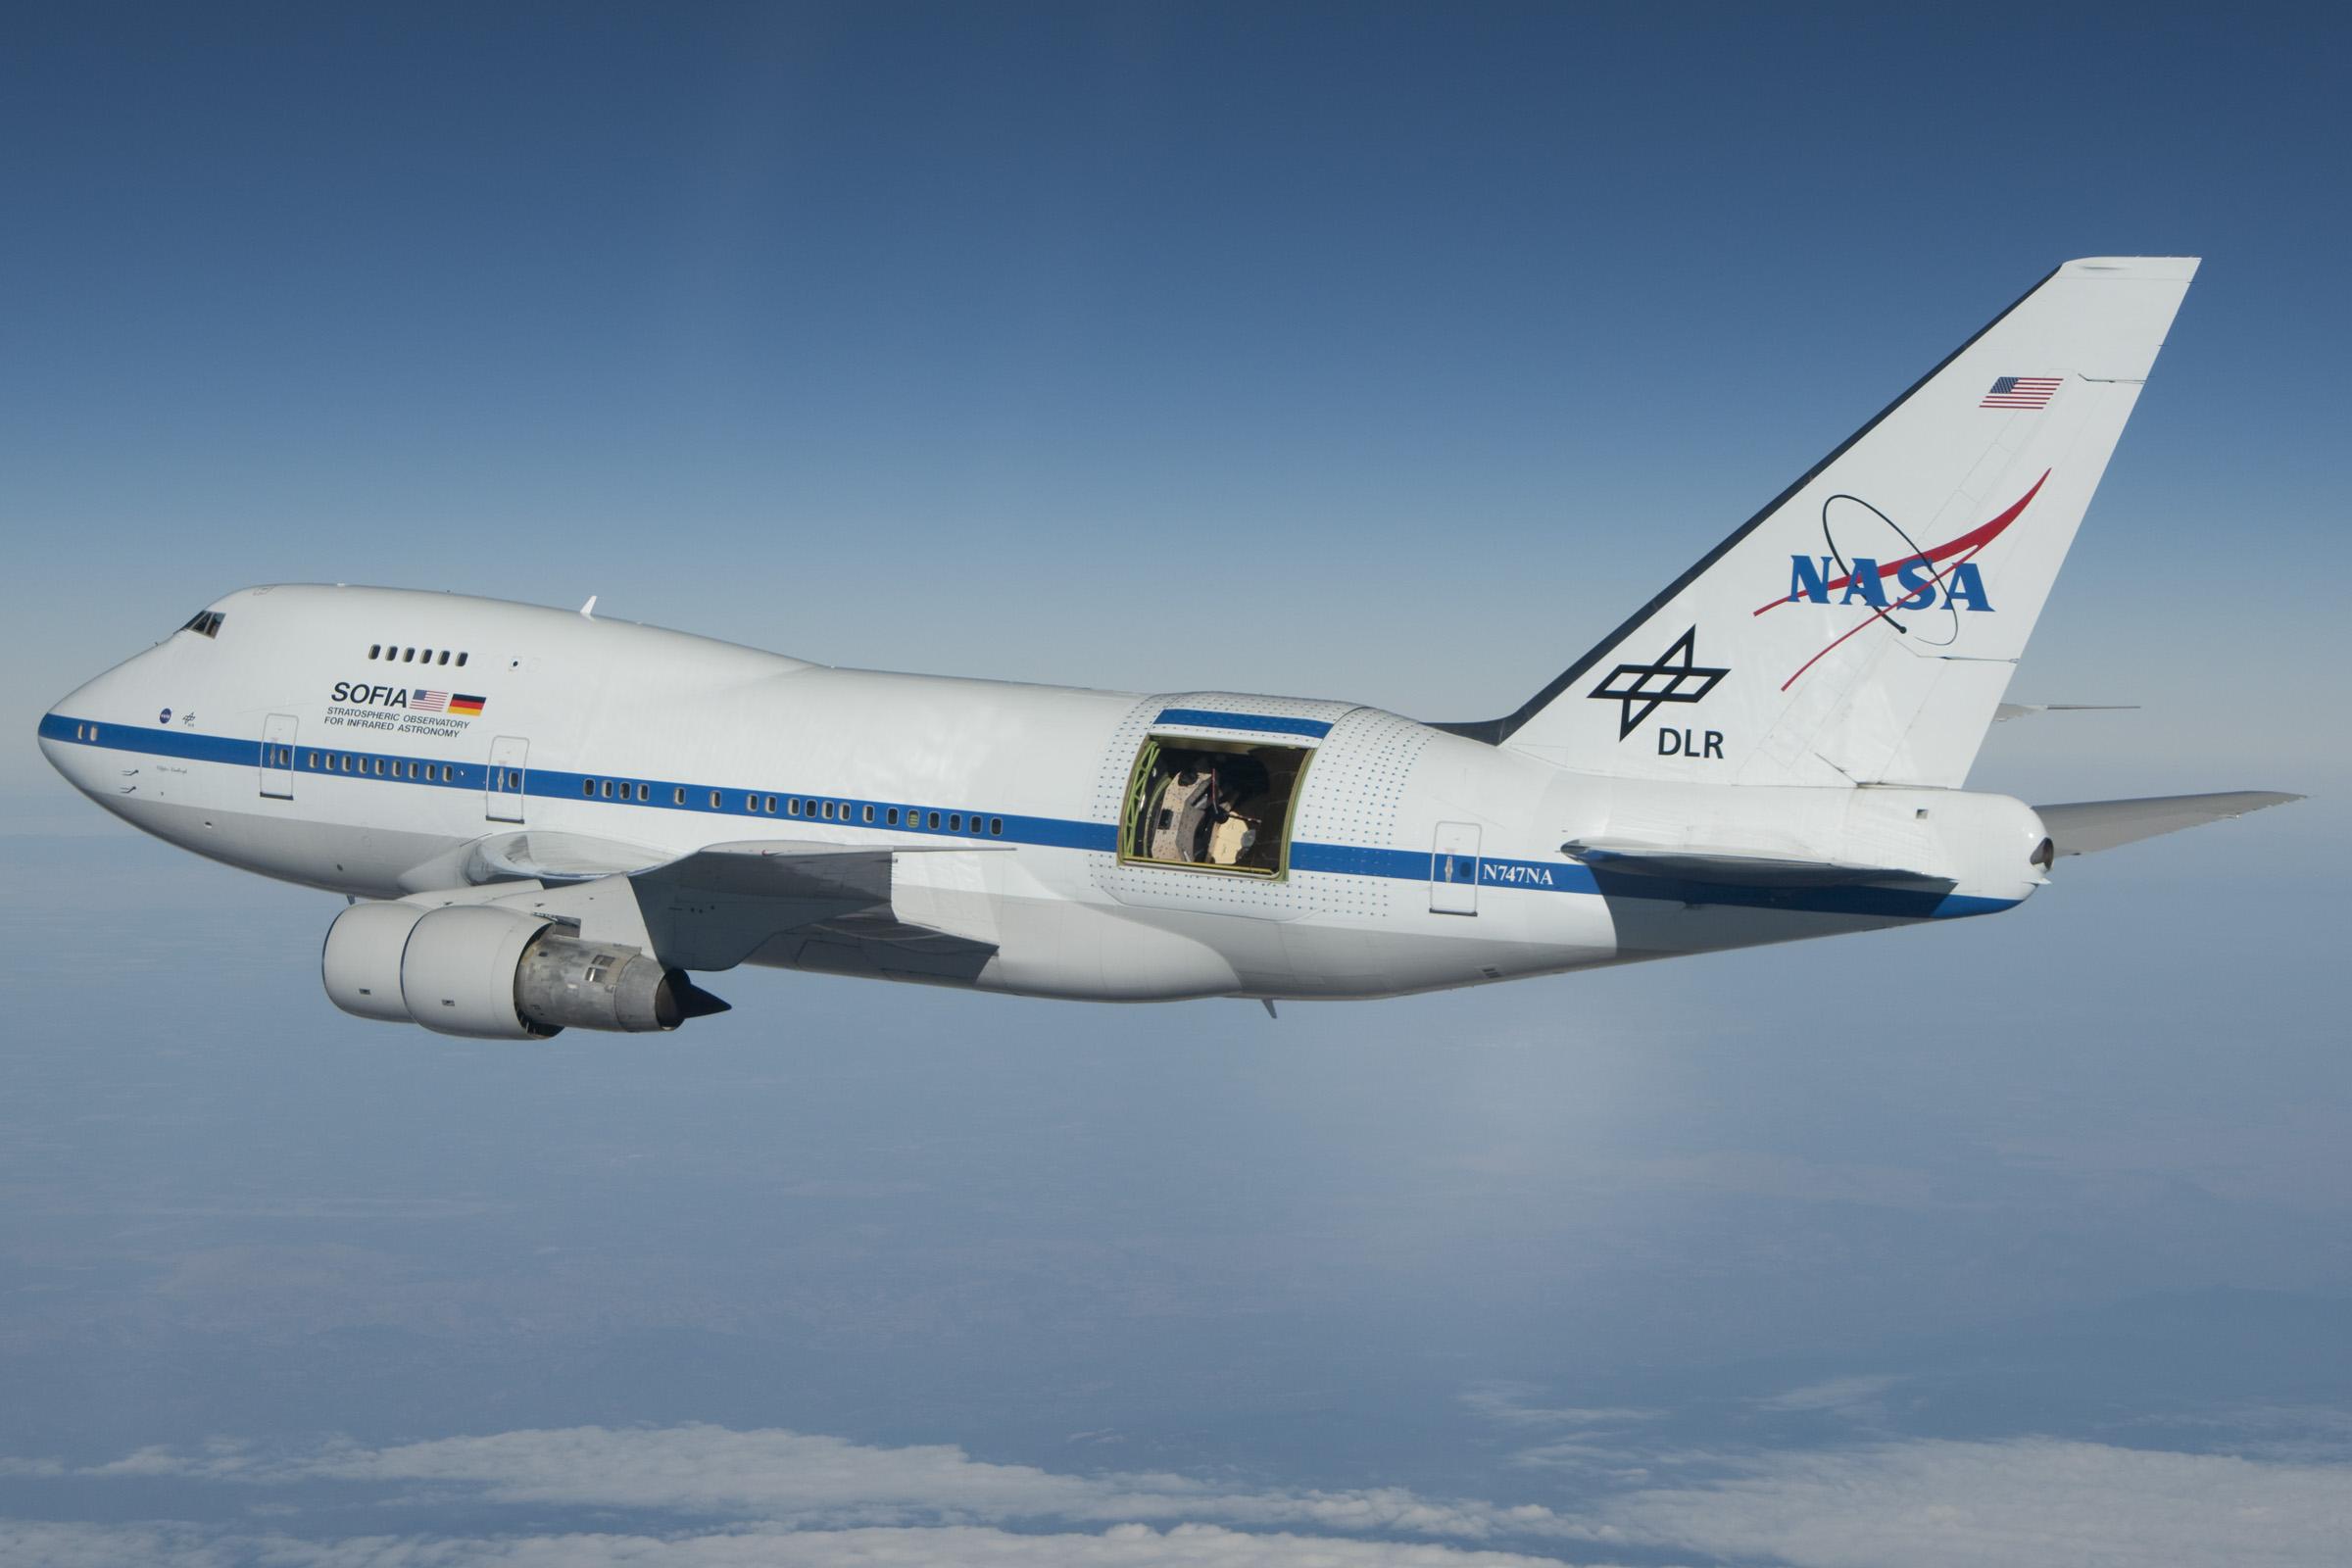 NASA’s SOFIA Boeing 747’s Journey Comes To An End